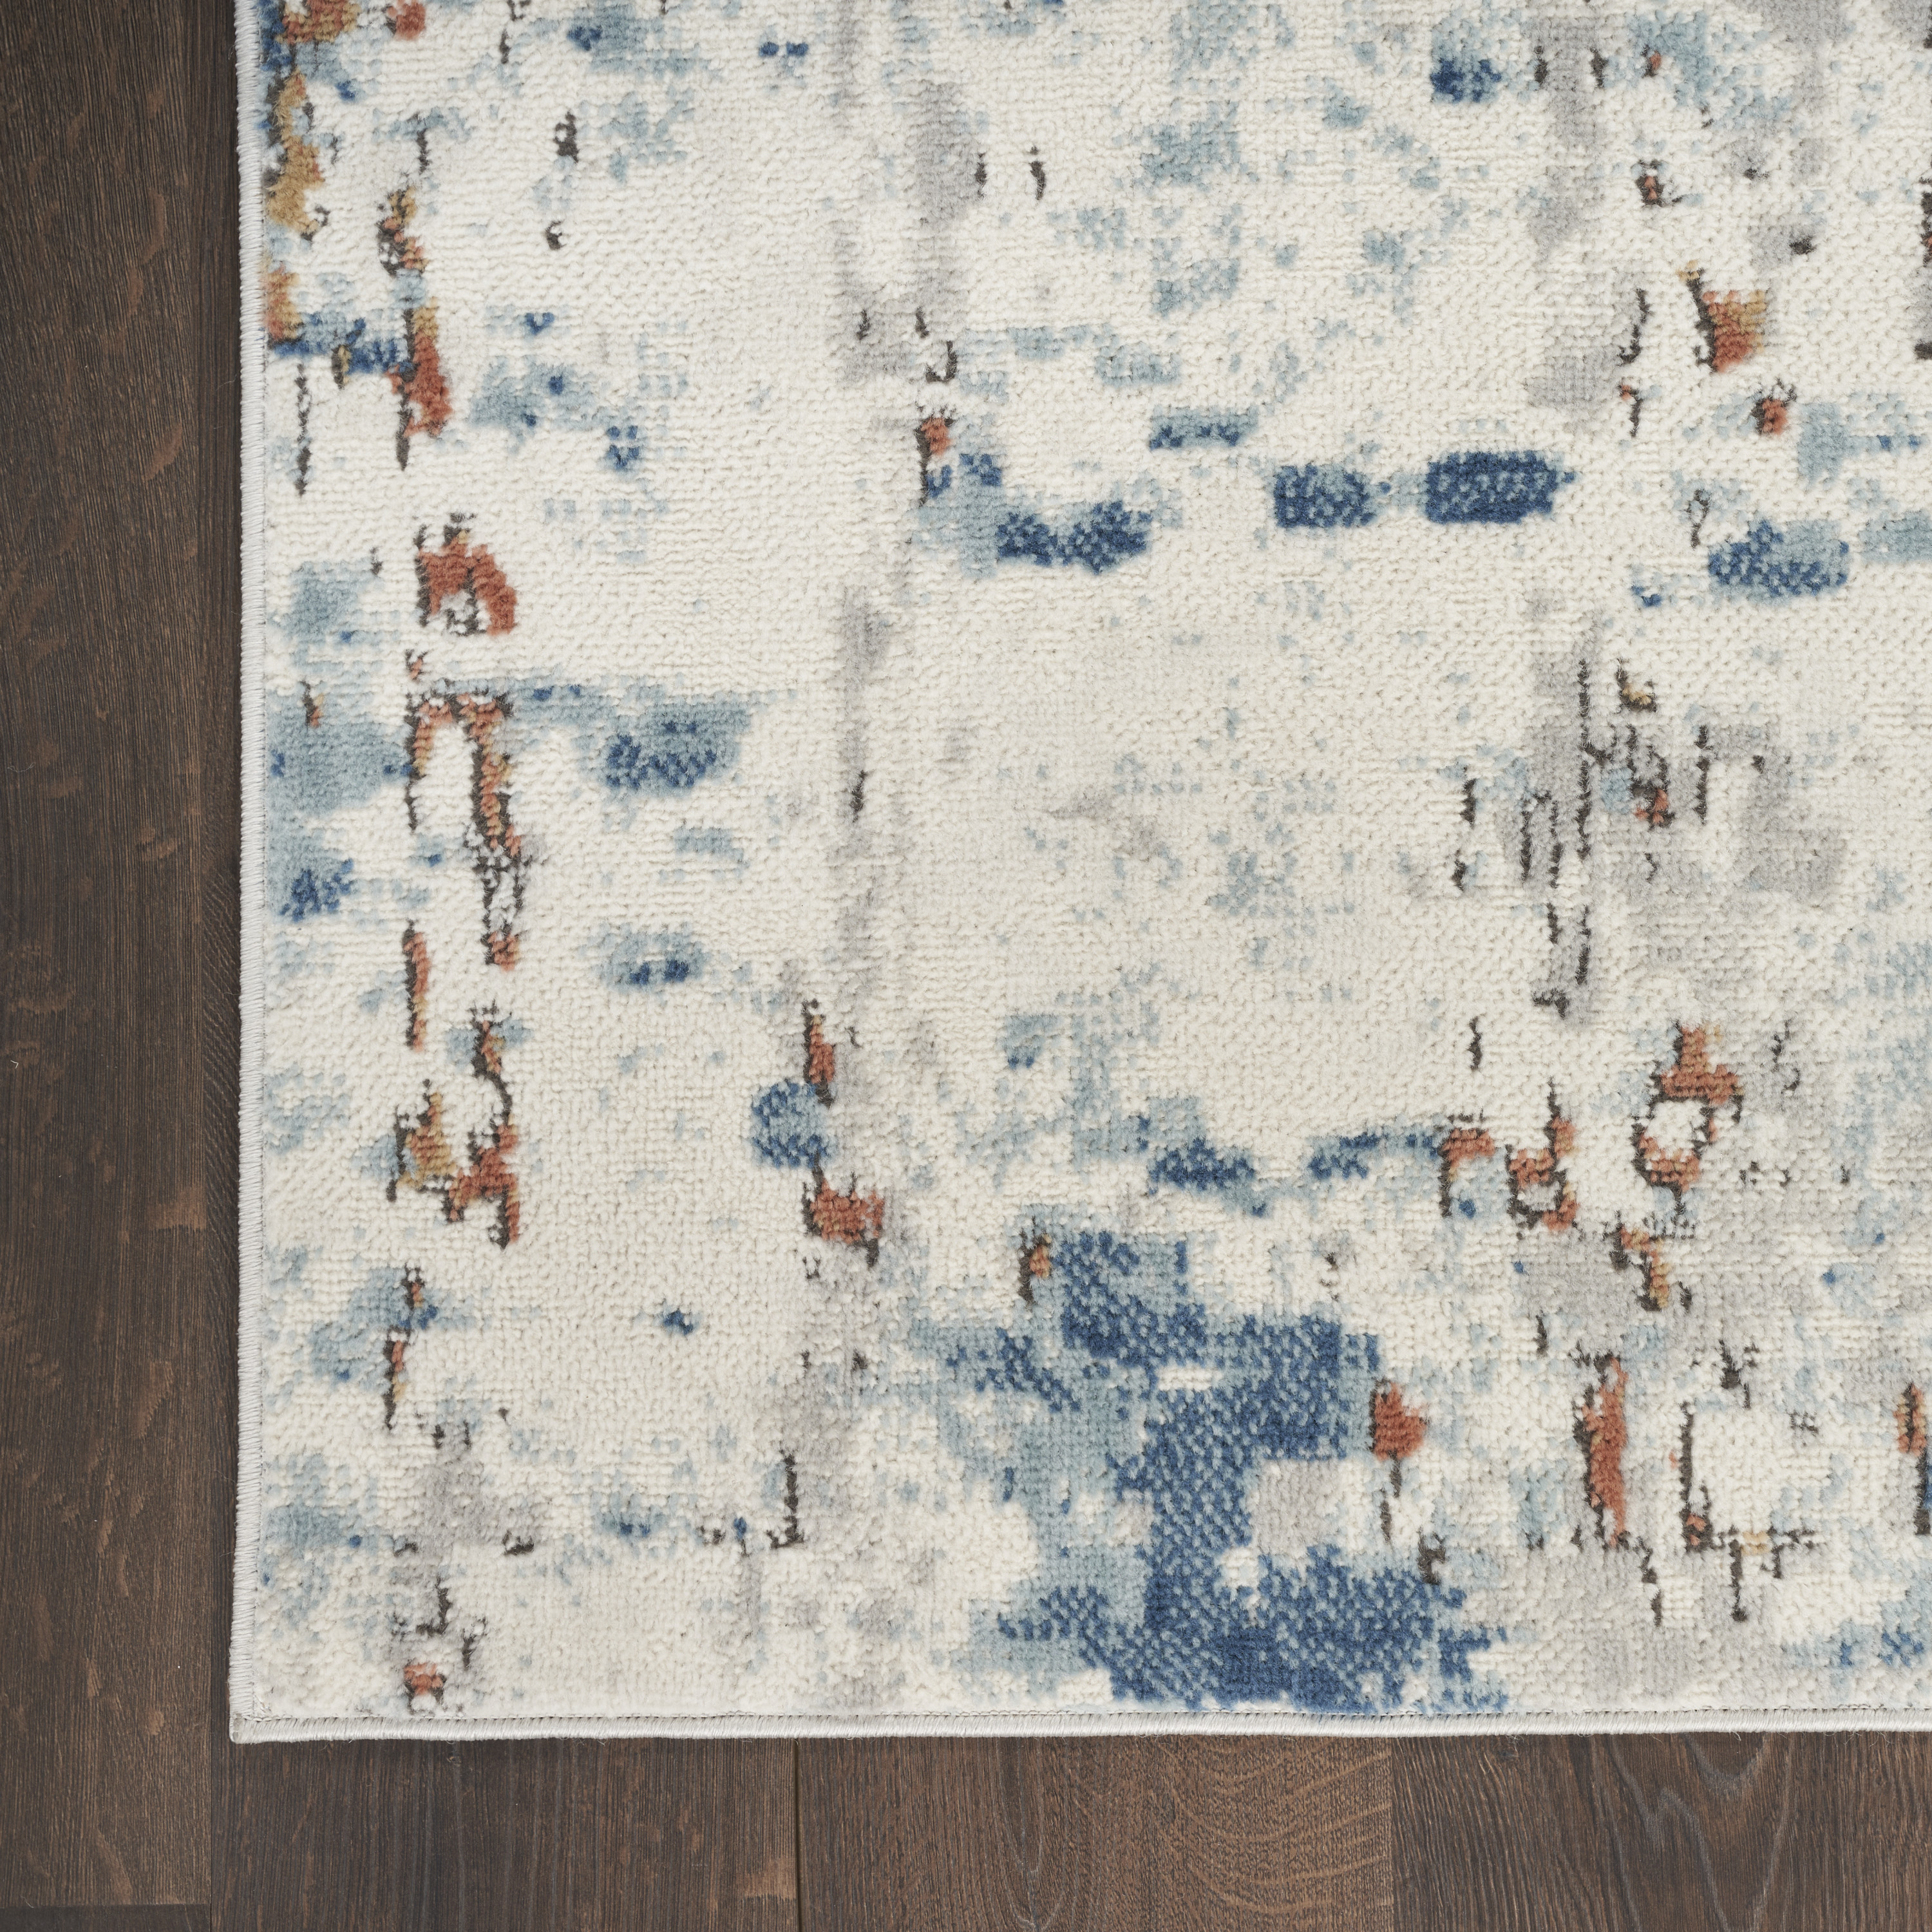 Nourison Concerto Abstract Beige Blue Rust 5'3" x 7'3" Area Rug, (5x7) - image 4 of 8